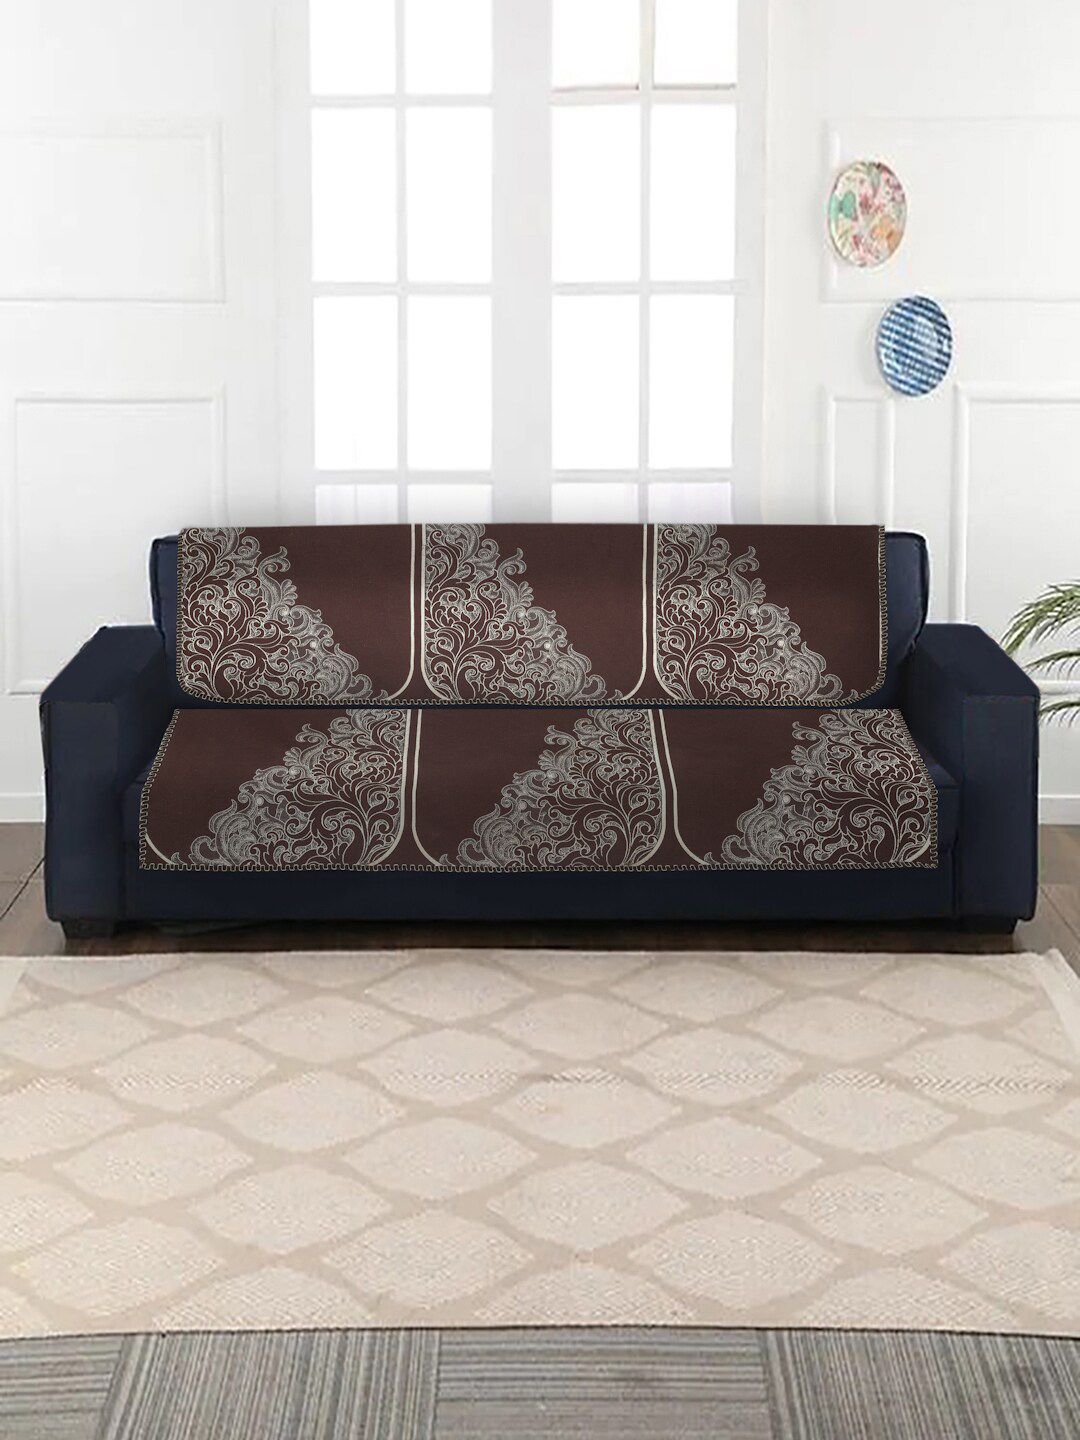 MULTITEX Set of 10 Grey & Brown Jacquard 5 Seater Sofa Covers Price in India